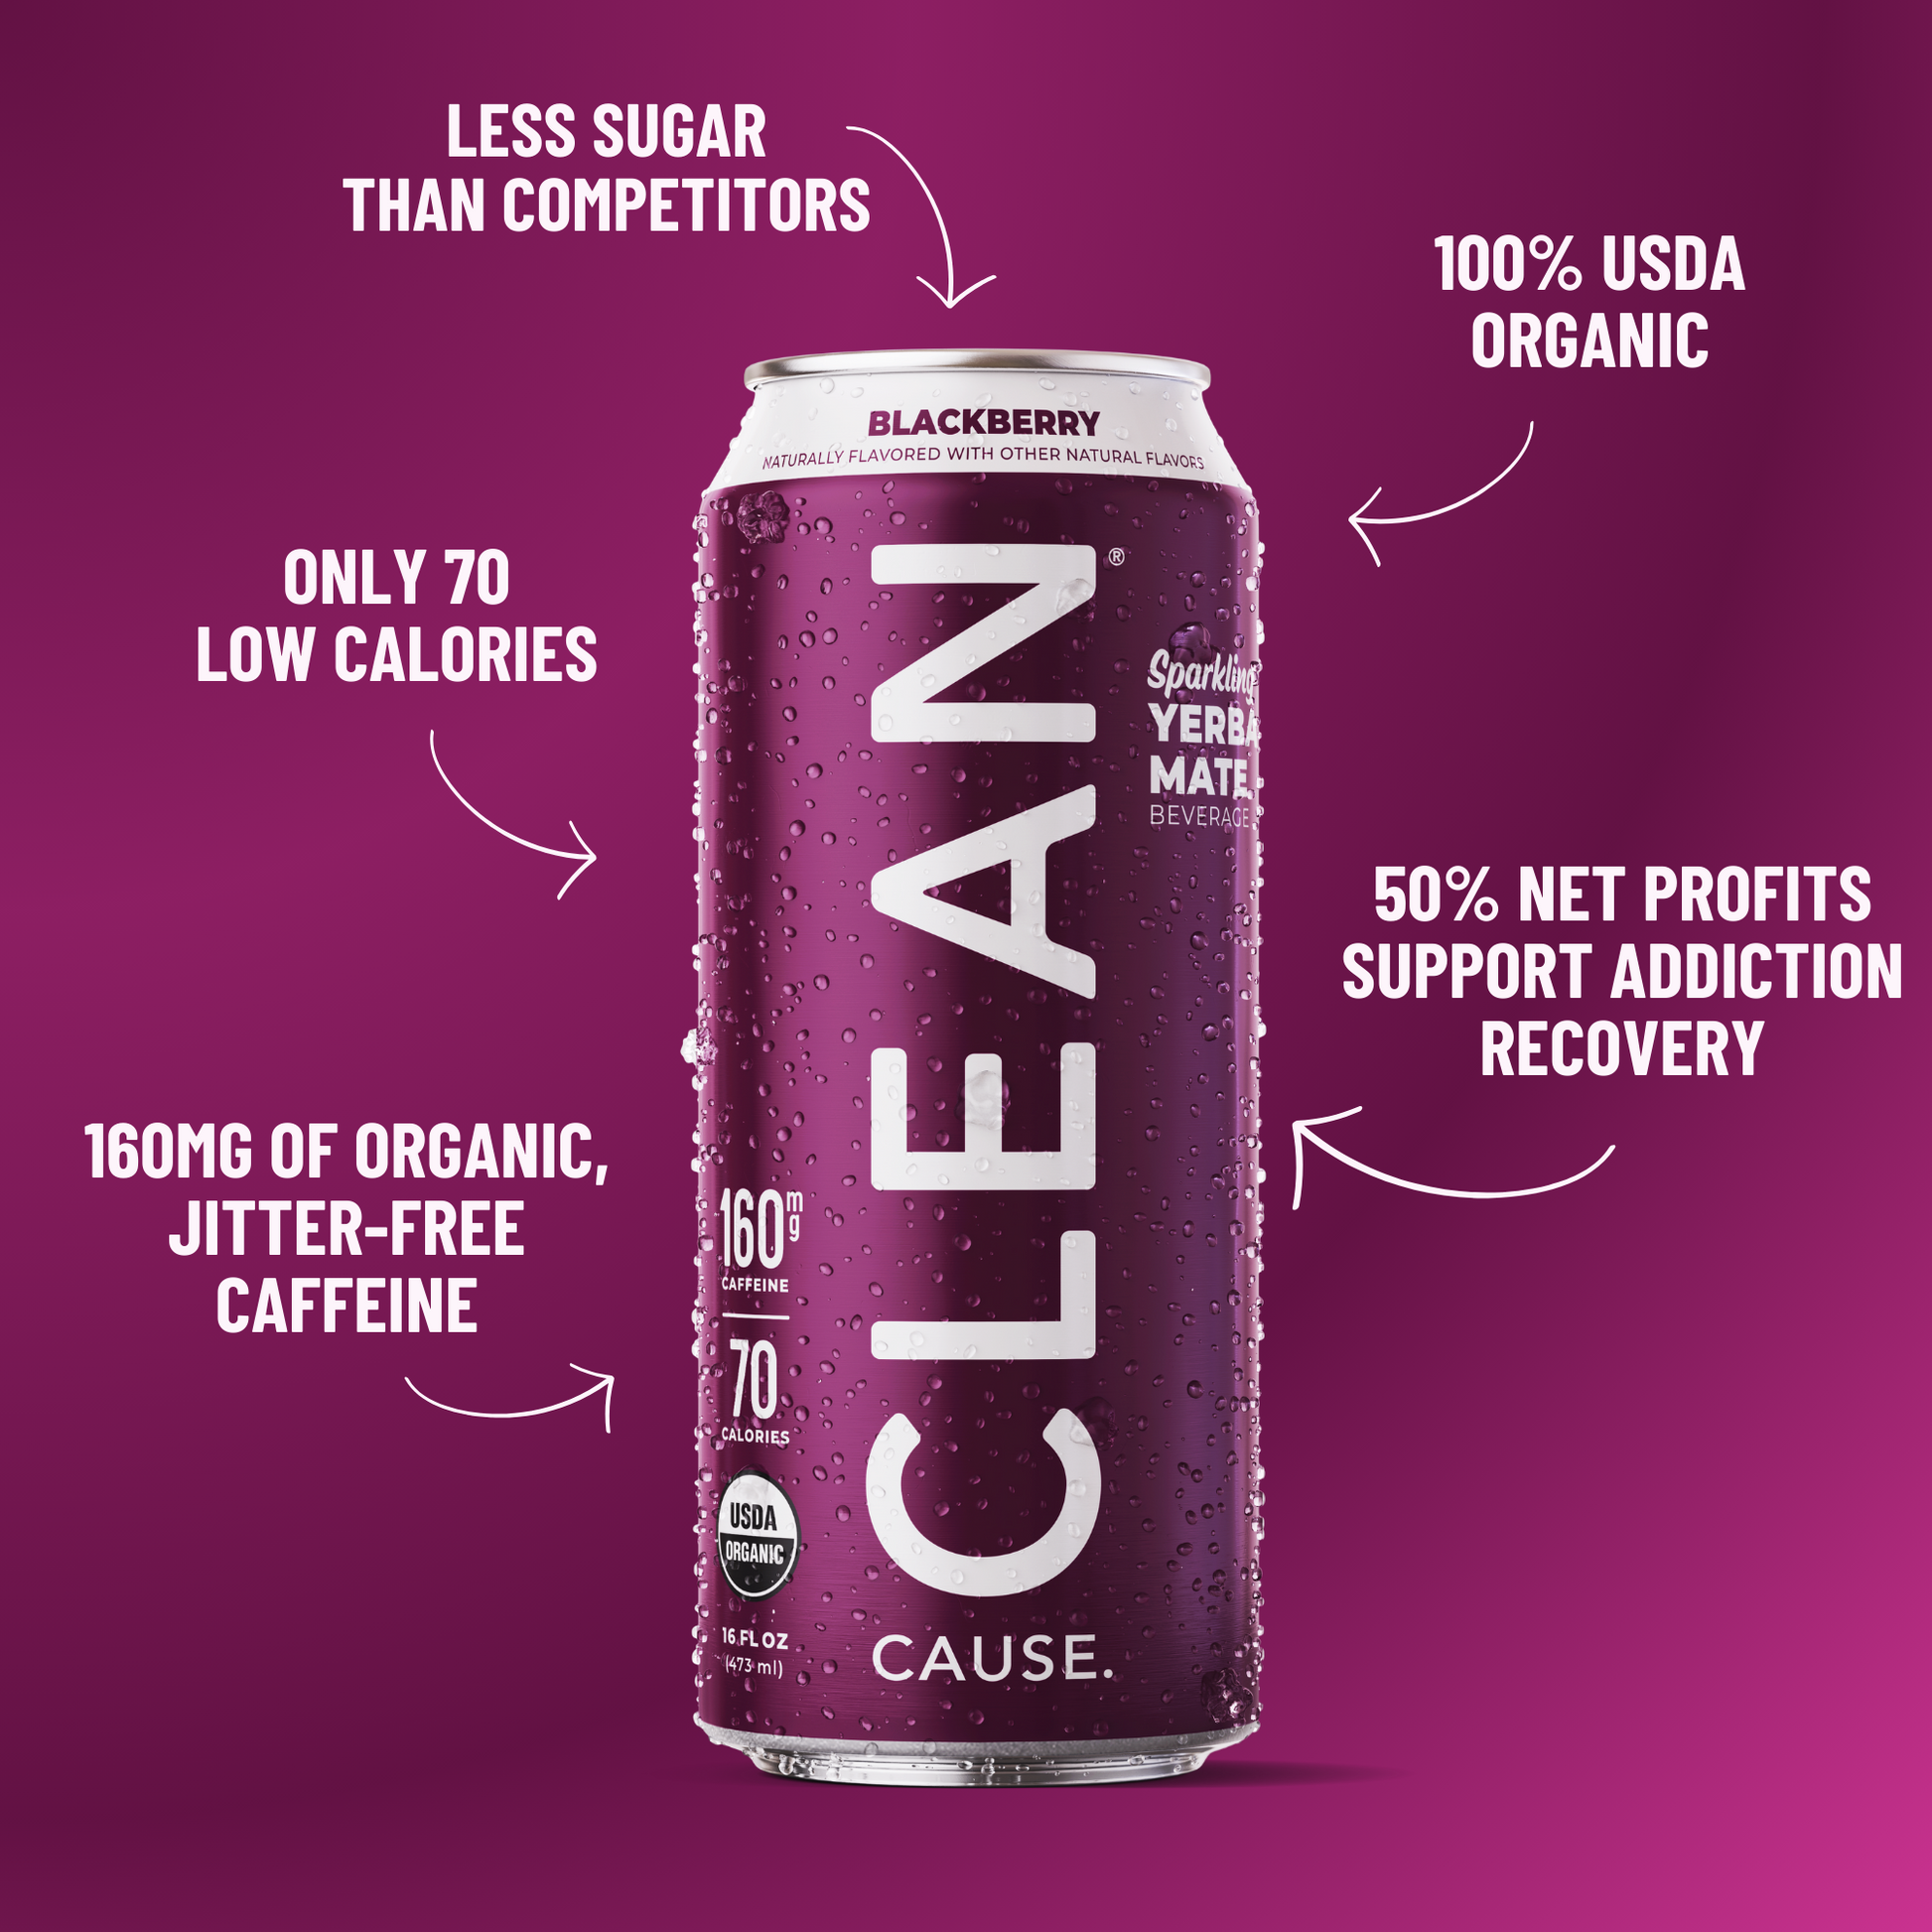 A can of CLEAN Cause Blackberry Yerba Mate with little attributes circling it: 160mg of organic jitter-free caffeine, only 70 calories, less sugar than competitors, 100% USDA organic, 50% net profits support addiction recovery